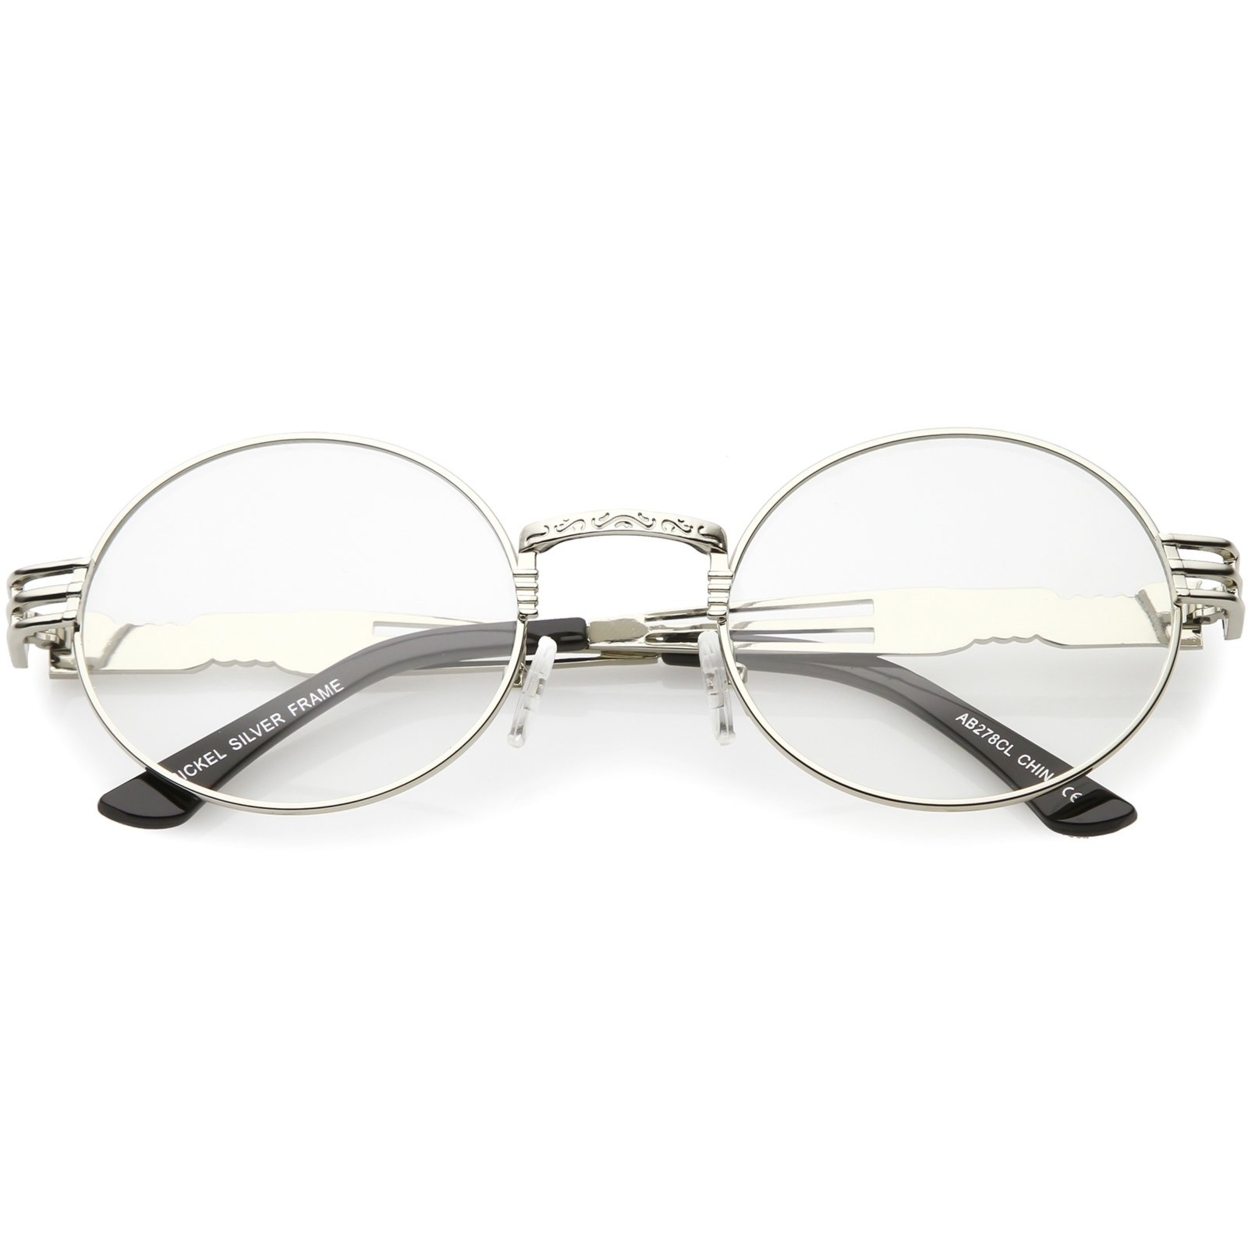 Steampunk Inspired Oval Eye Glasses Unique Engraved Metal Detail Clear Lens 60mm - Gold / Clear